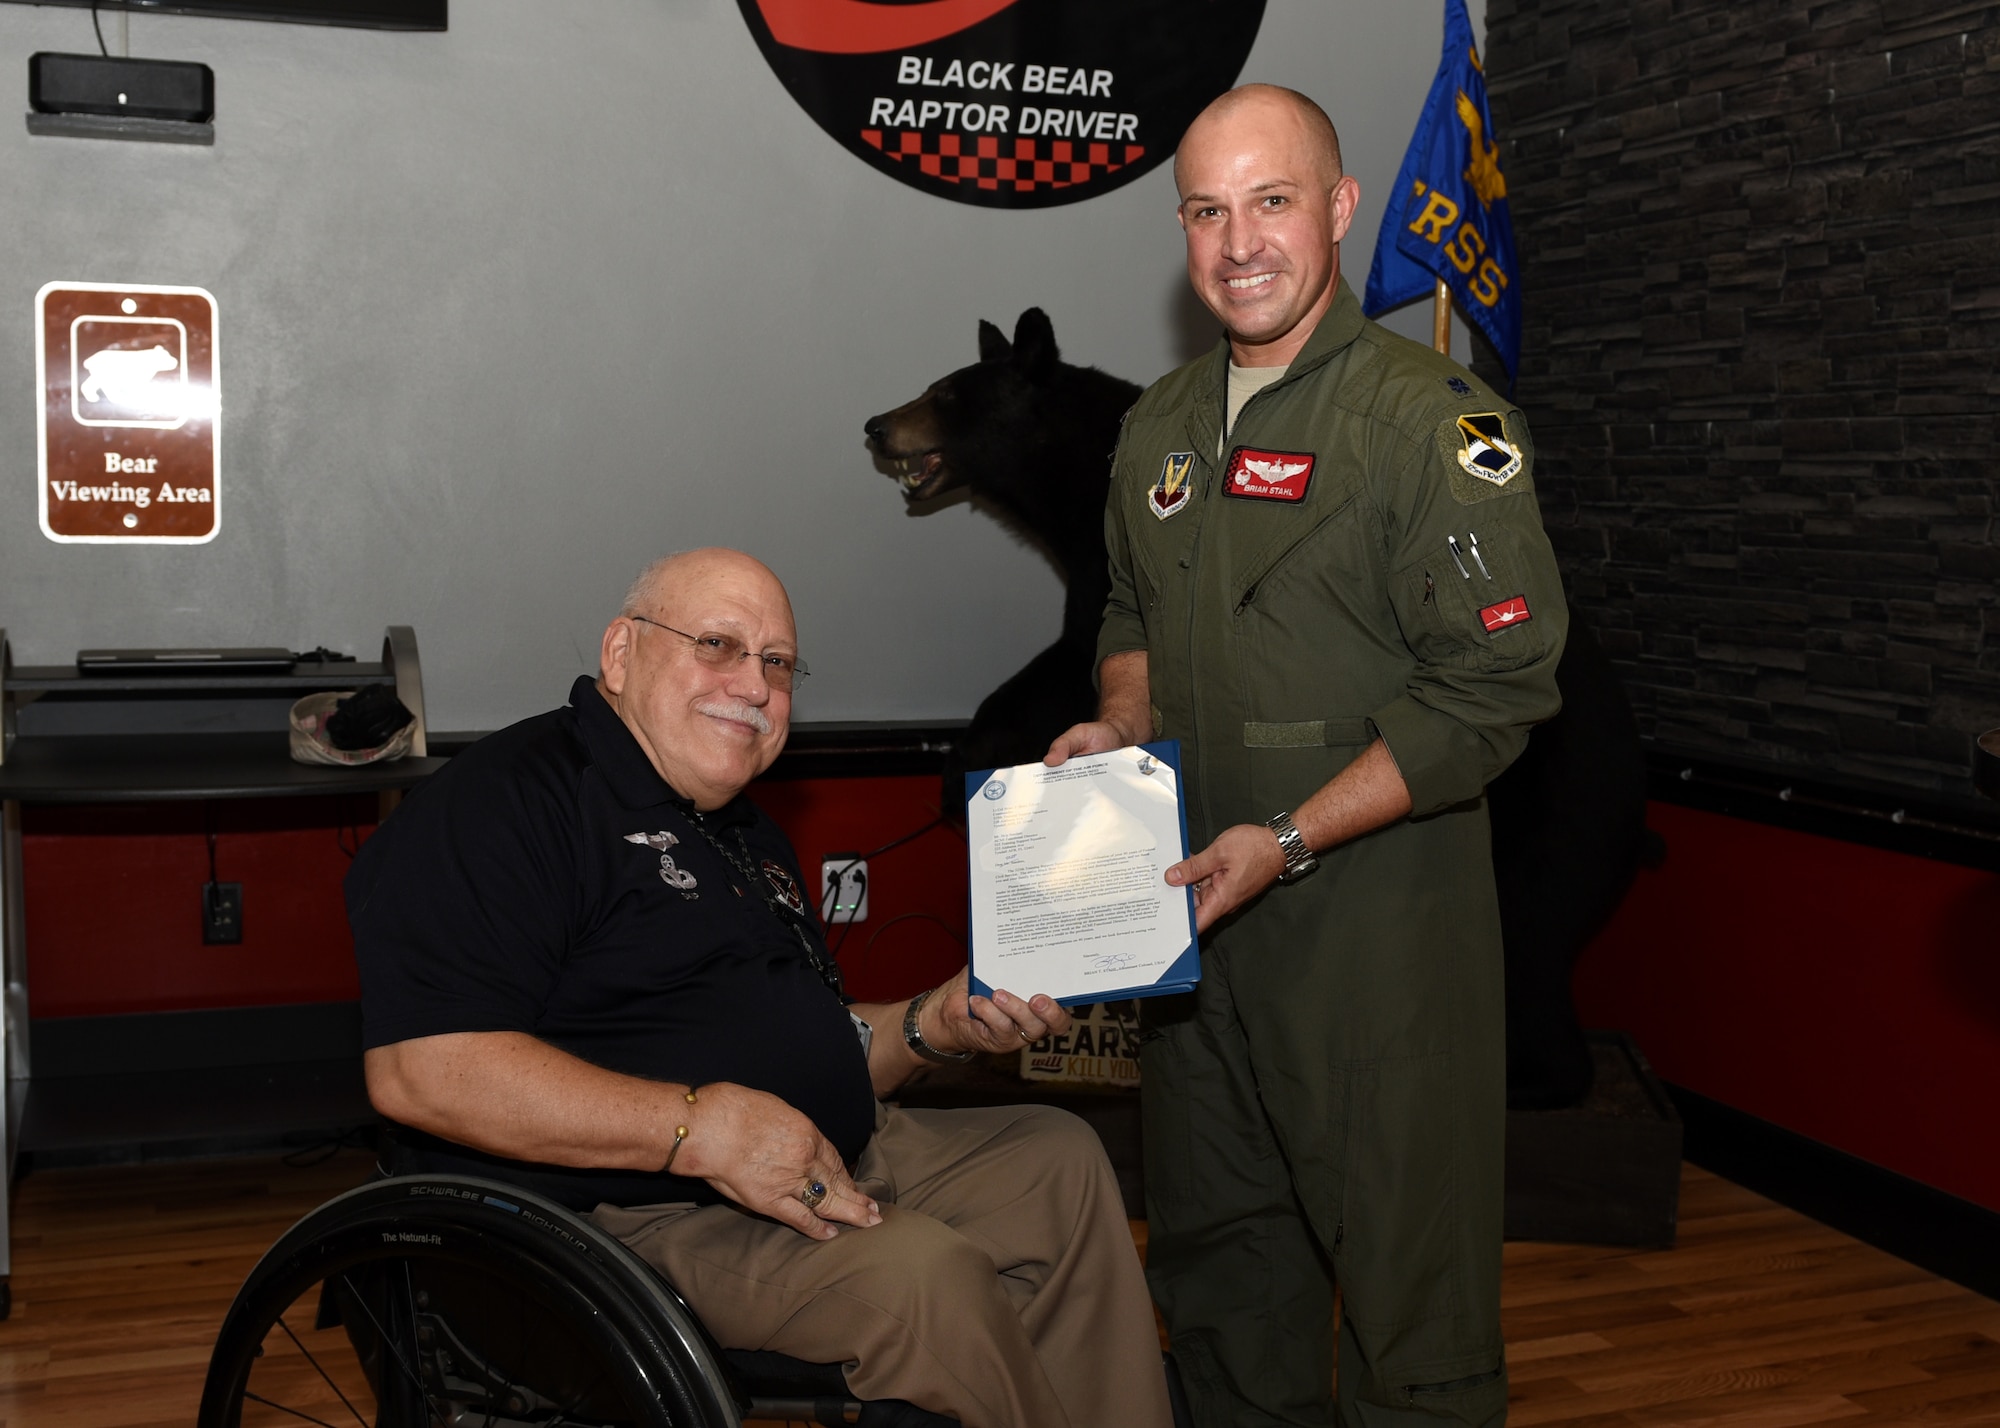 U.S. Air Force Lt. Col. Brian Stahl, 325th Training Support Squadron commander, presents Skip Sanders, 325th TRSS air combat maneuvering instrumentation functional director, an award during a recognition ceremony at Tyndall Air Force Base, Fla., Aug. 17, 2017. The award is to recognize Sanders for reaching 40 years of service in support of the U.S. government. The 325th TRSS manages training resources and conducts unrivaled academic and realistic simulator training to produce America's air dominance team of F-22 Raptor pilots, air battle managers and intelligence officers for worldwide assignments.